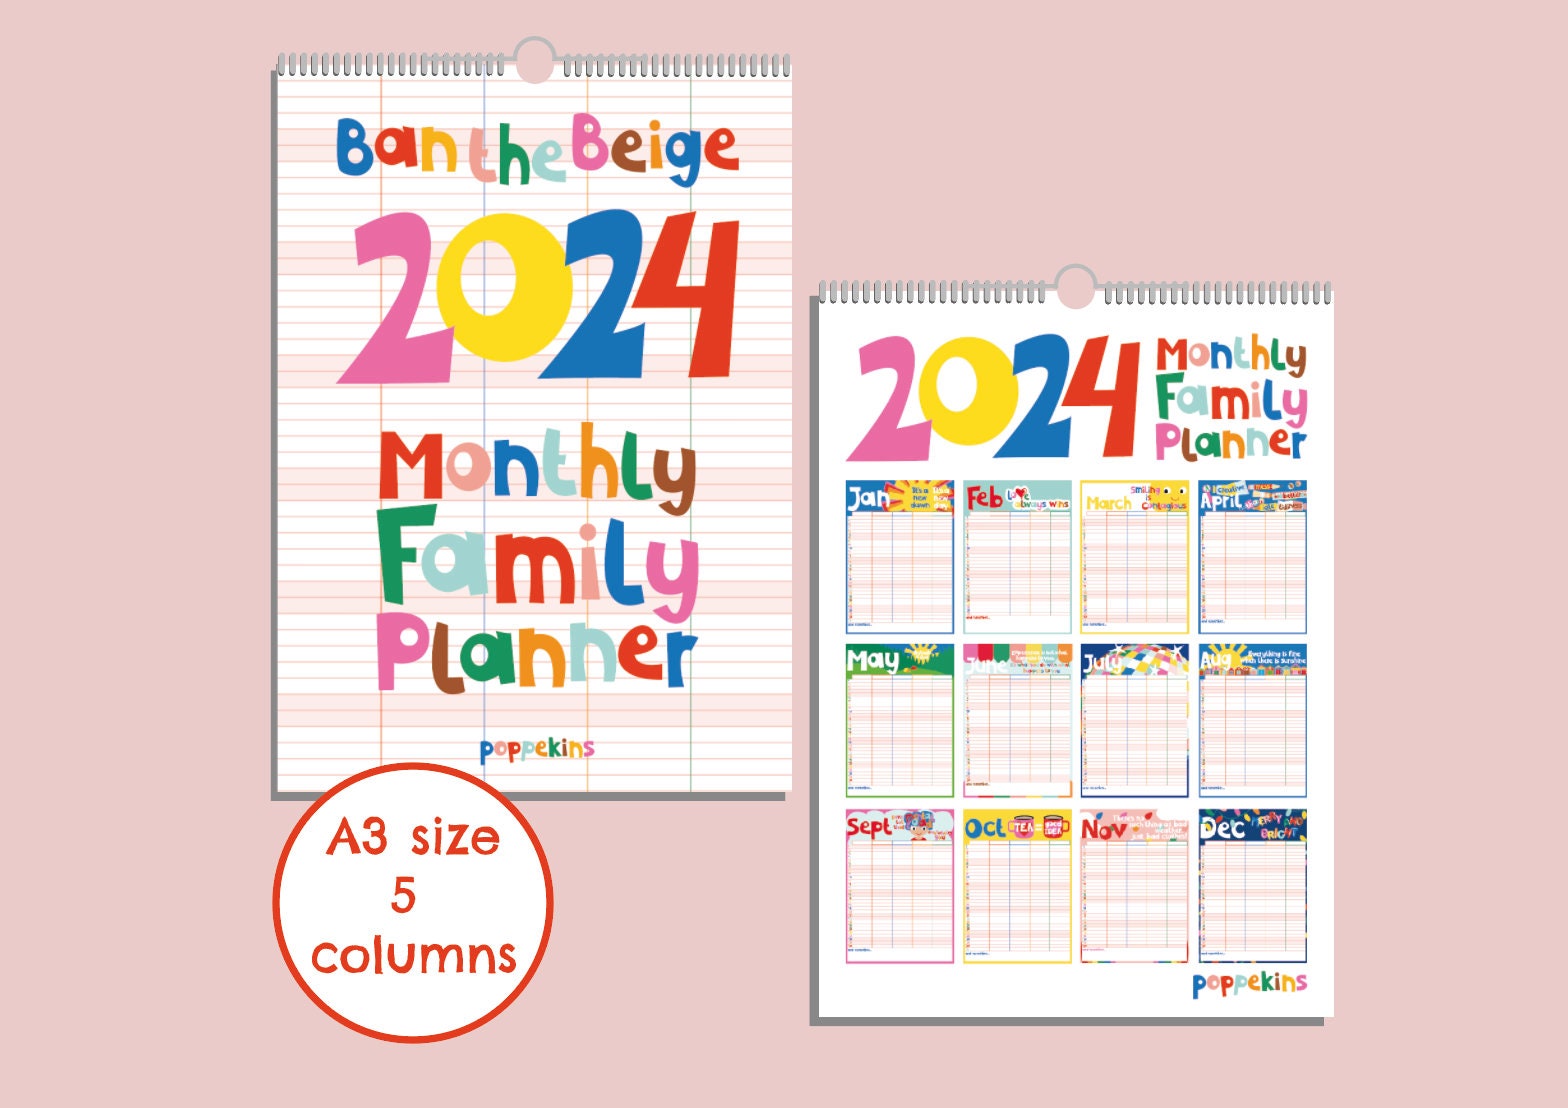 NEW 2024 Monthly Family Planner Ban The Beige A3 size Bright Motivational  Illustrations Uncoated recyclable paper -  Italia